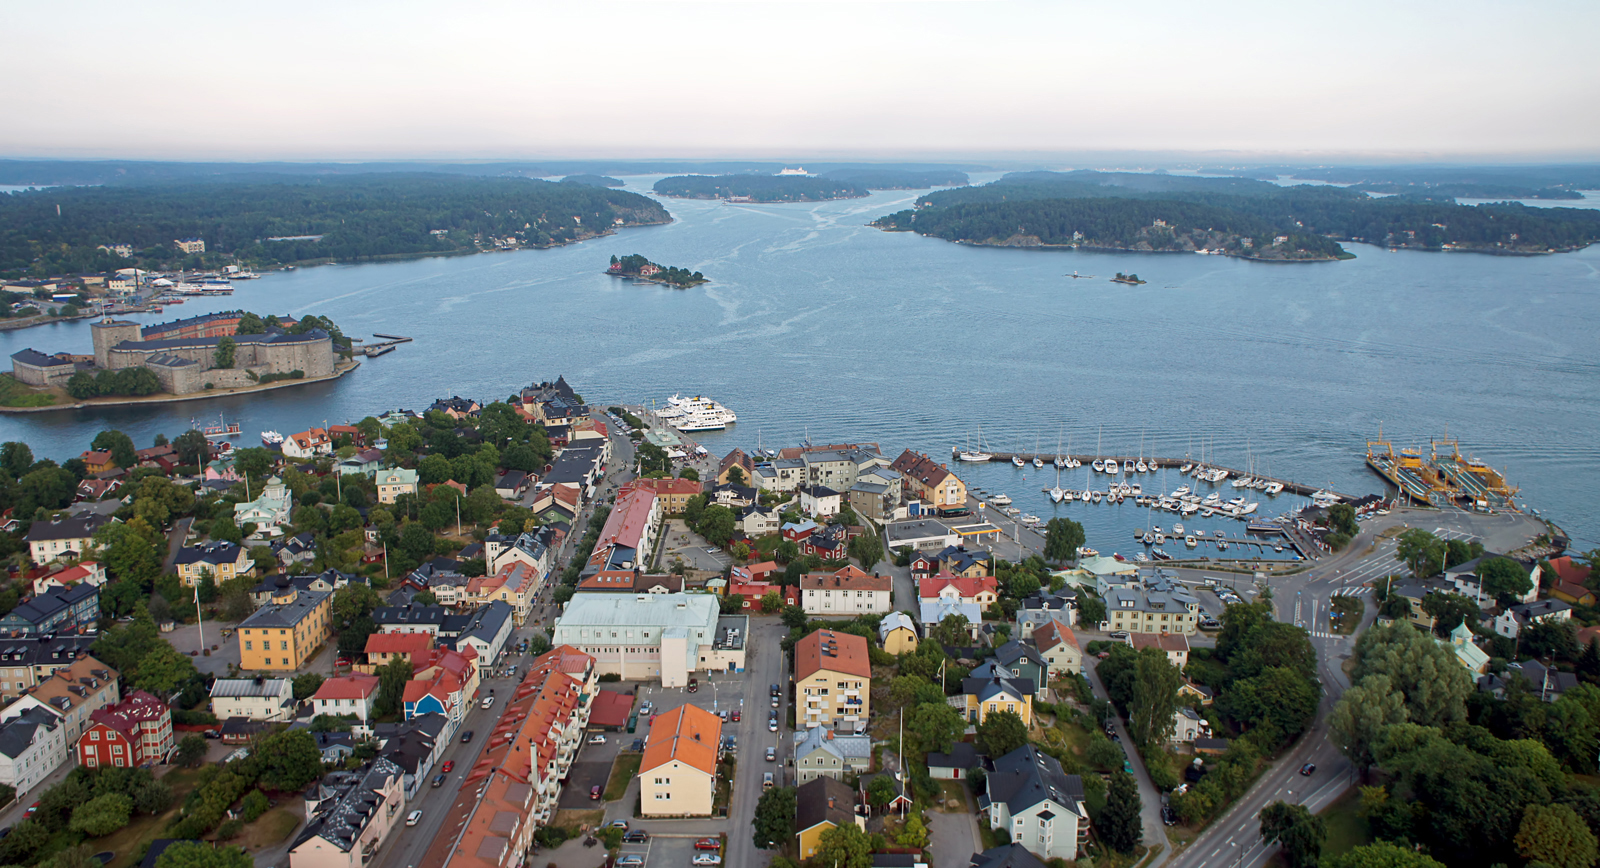  An aerial view of the town of Vaxholm, Sweden, with the Vaxholm Fortress on the left and the main harbor on the right.